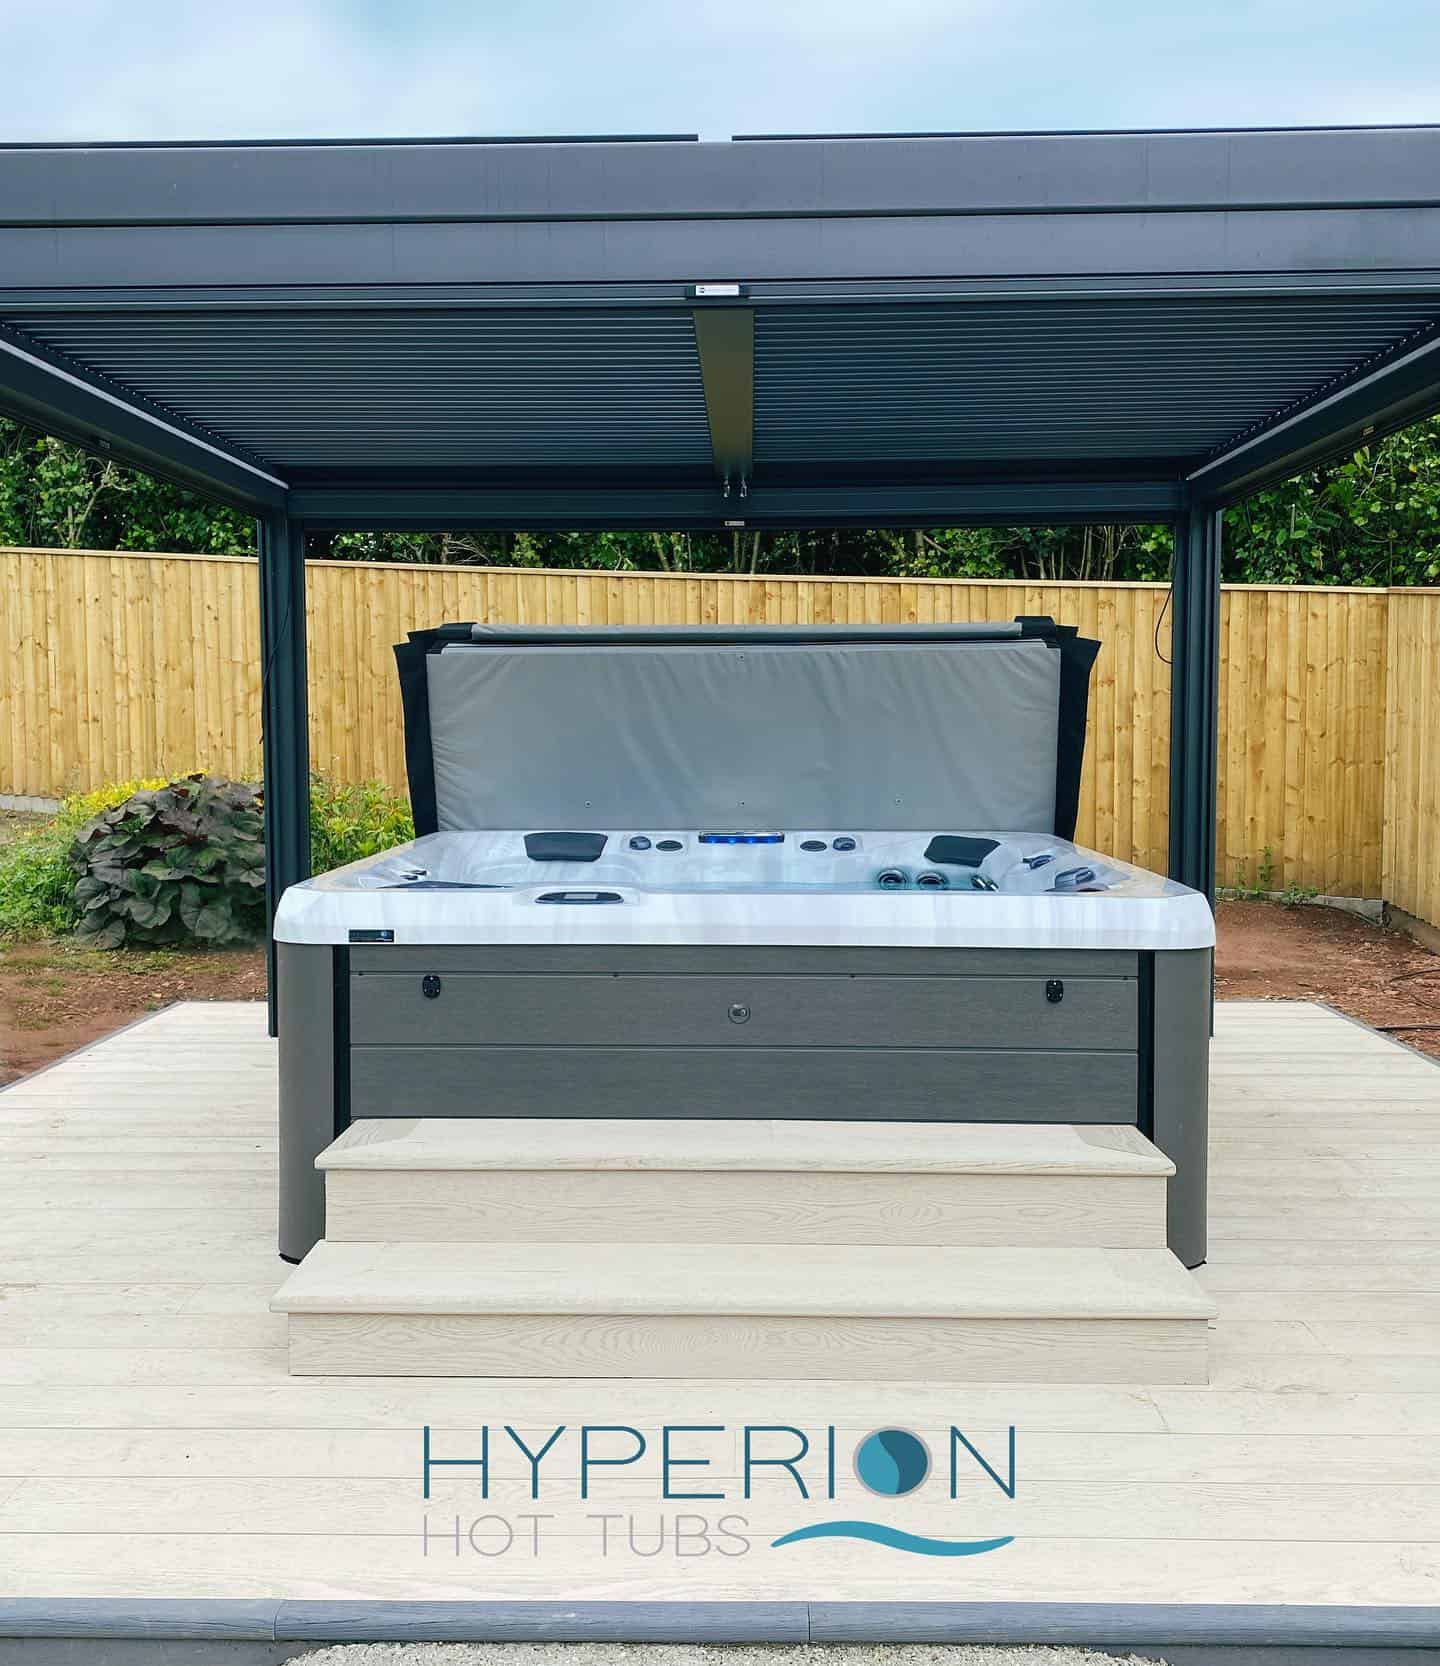 Legend 7 hot tub installed by Hyperion Hot Tubs in Wimborne, Dorset.

This is a very popular two pump hot tub, with 6 seats.